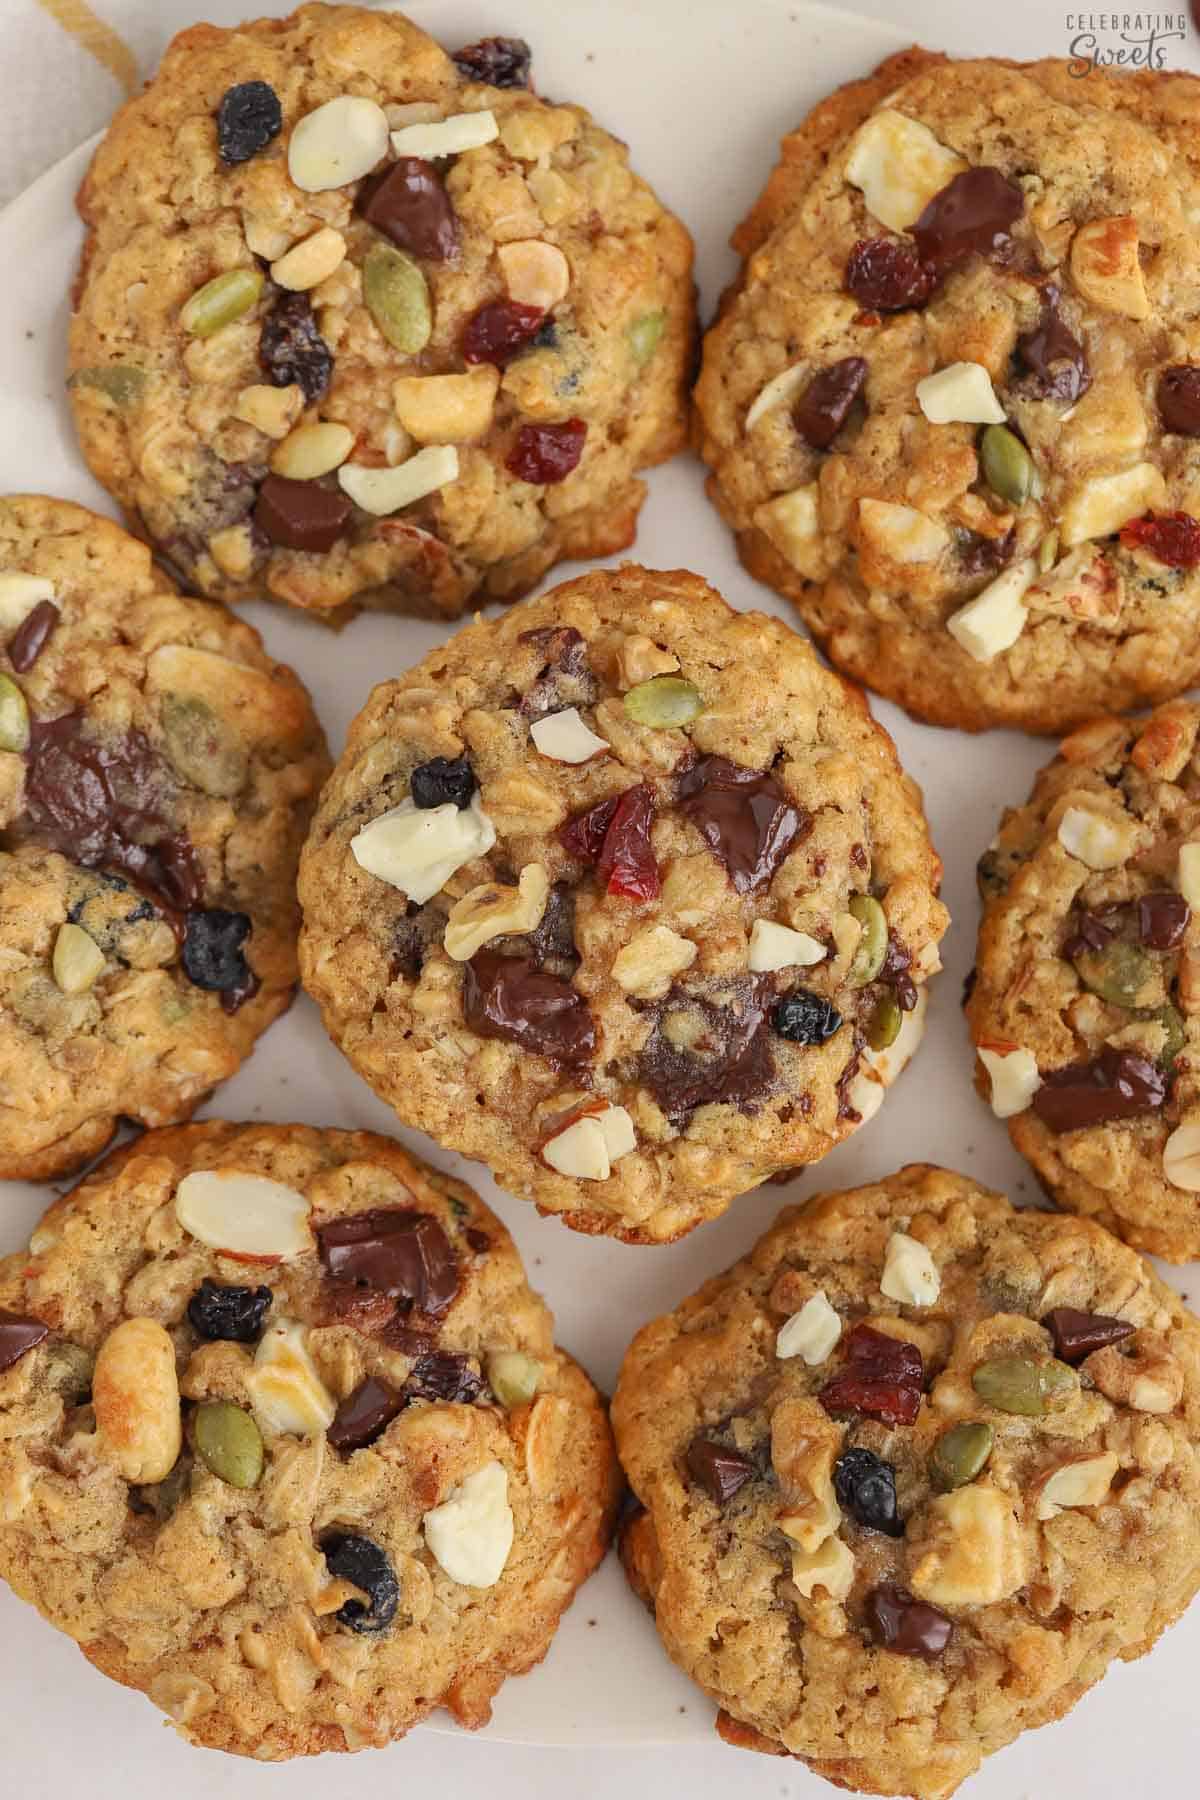 Trail mix cookies on a white plate.